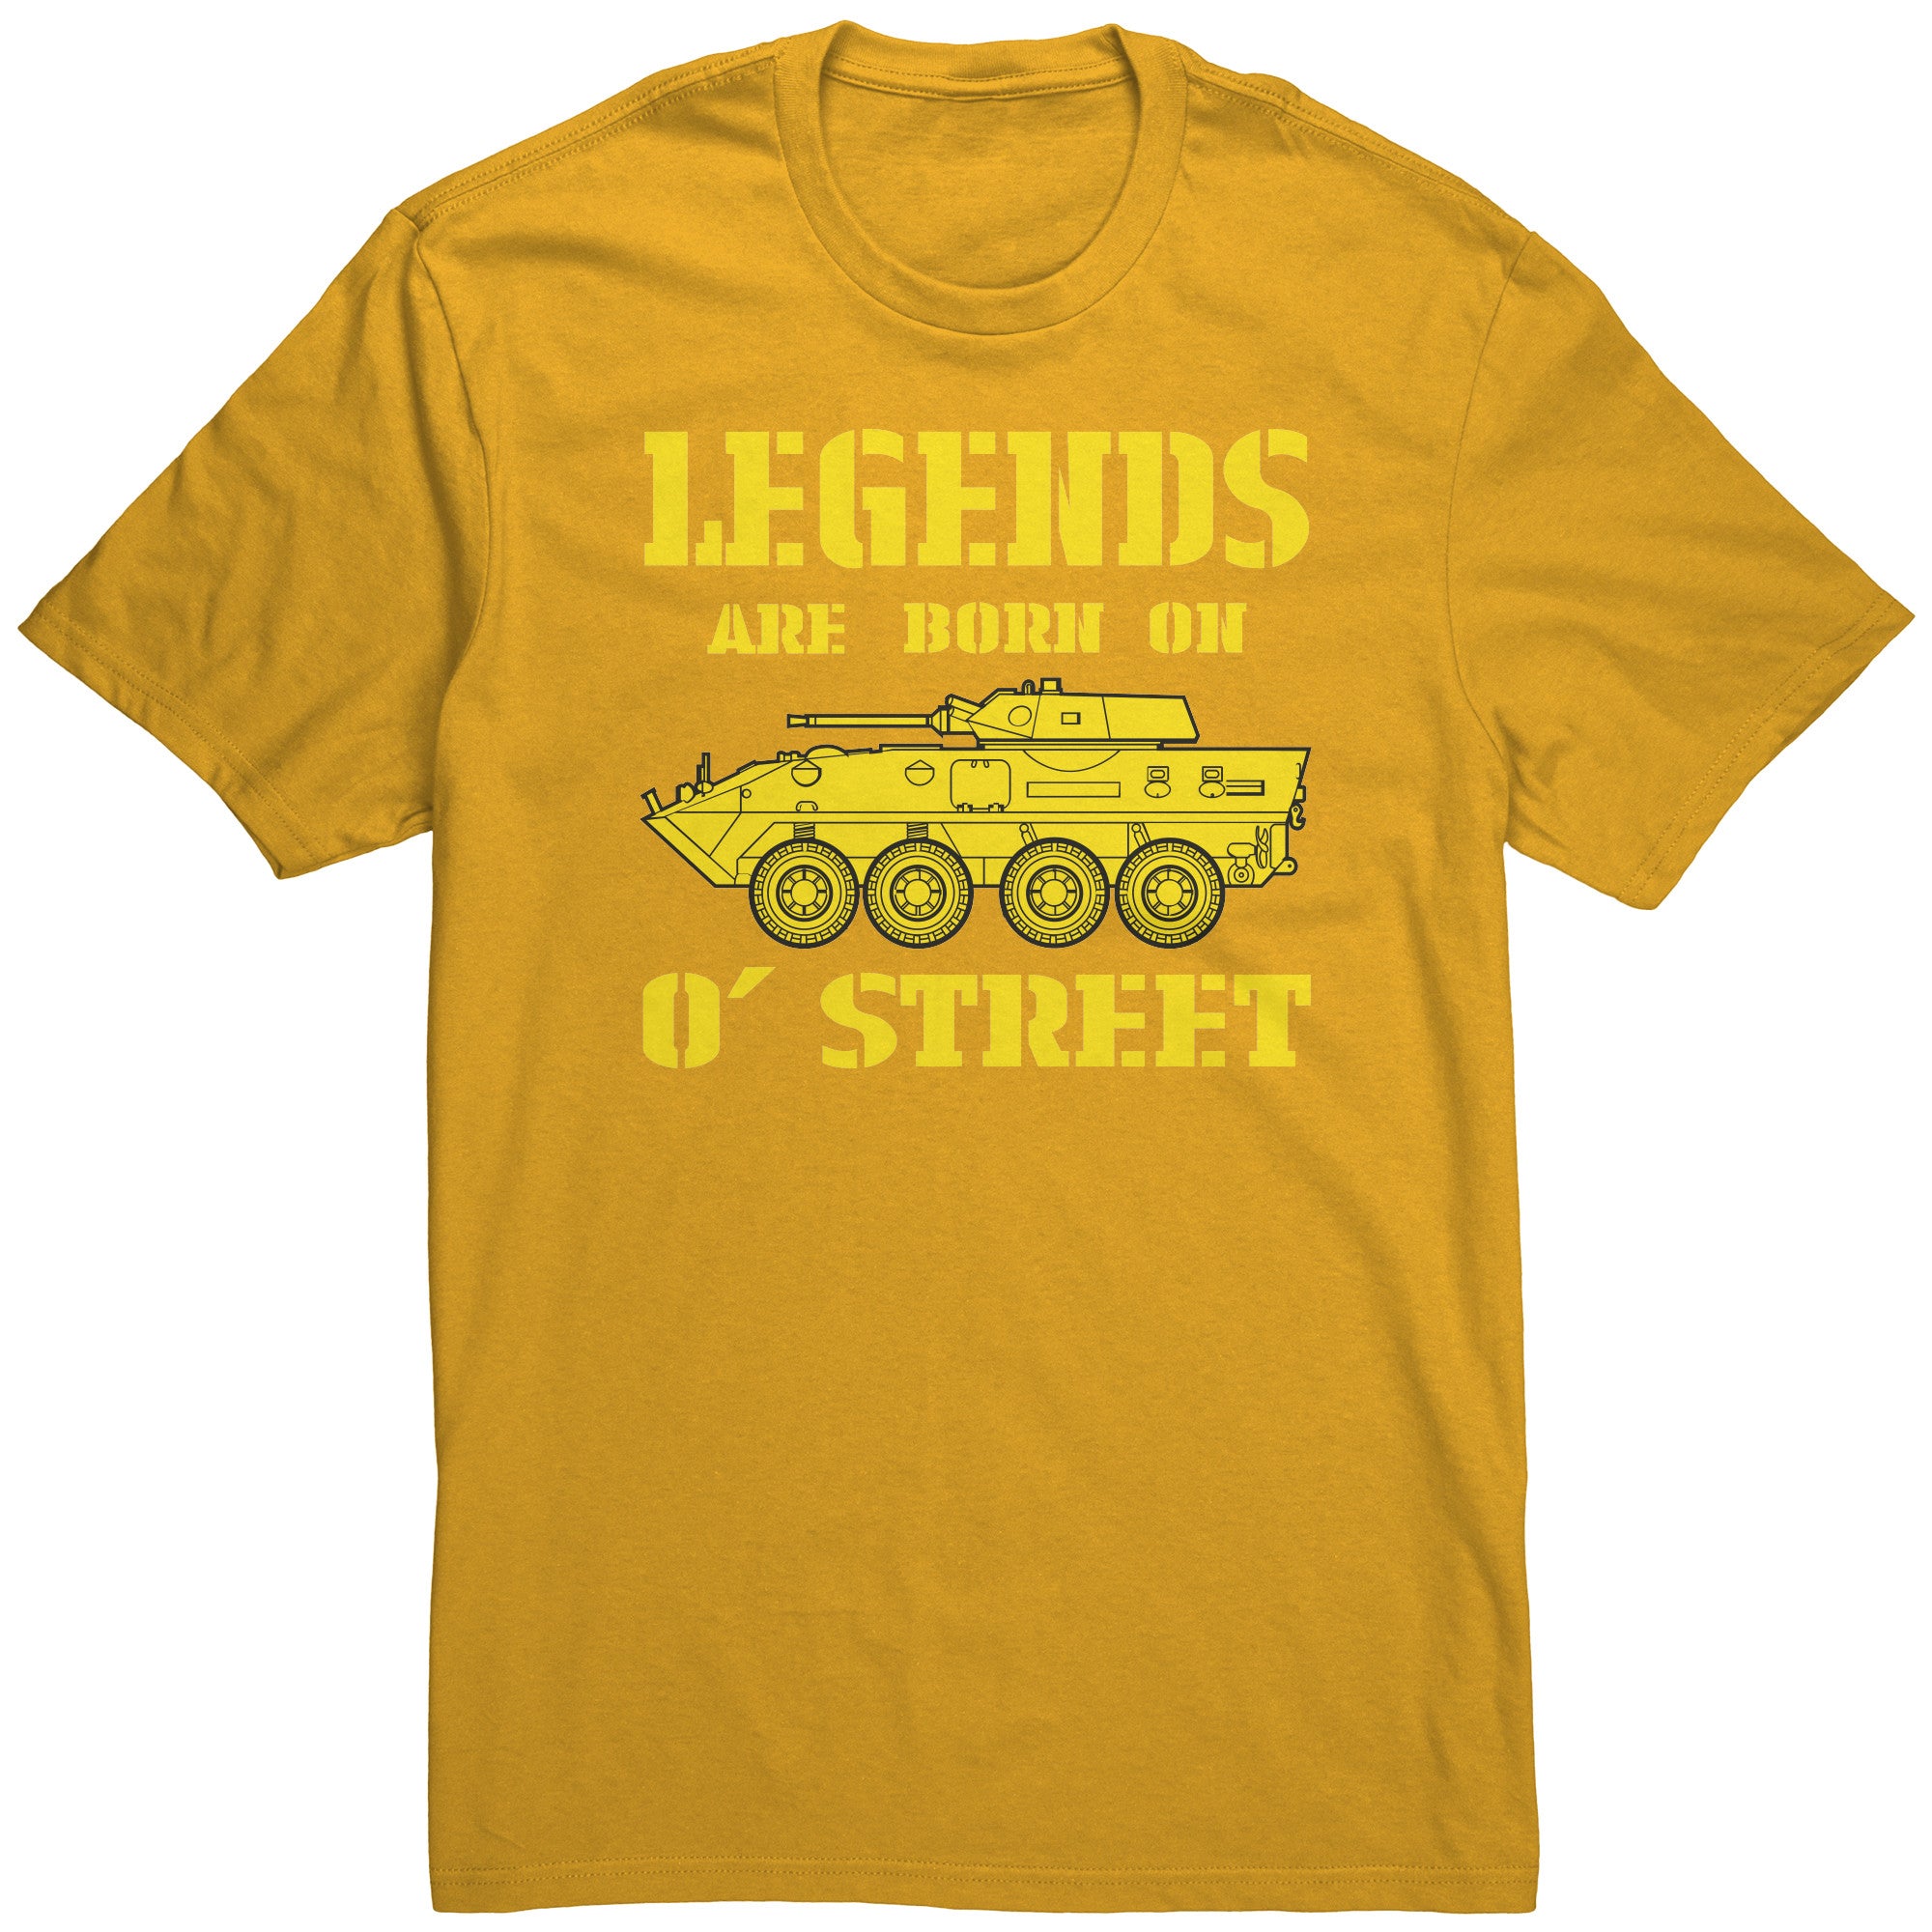 LEGENDS ARE BORN ON O STREET CREW T-SHIRT